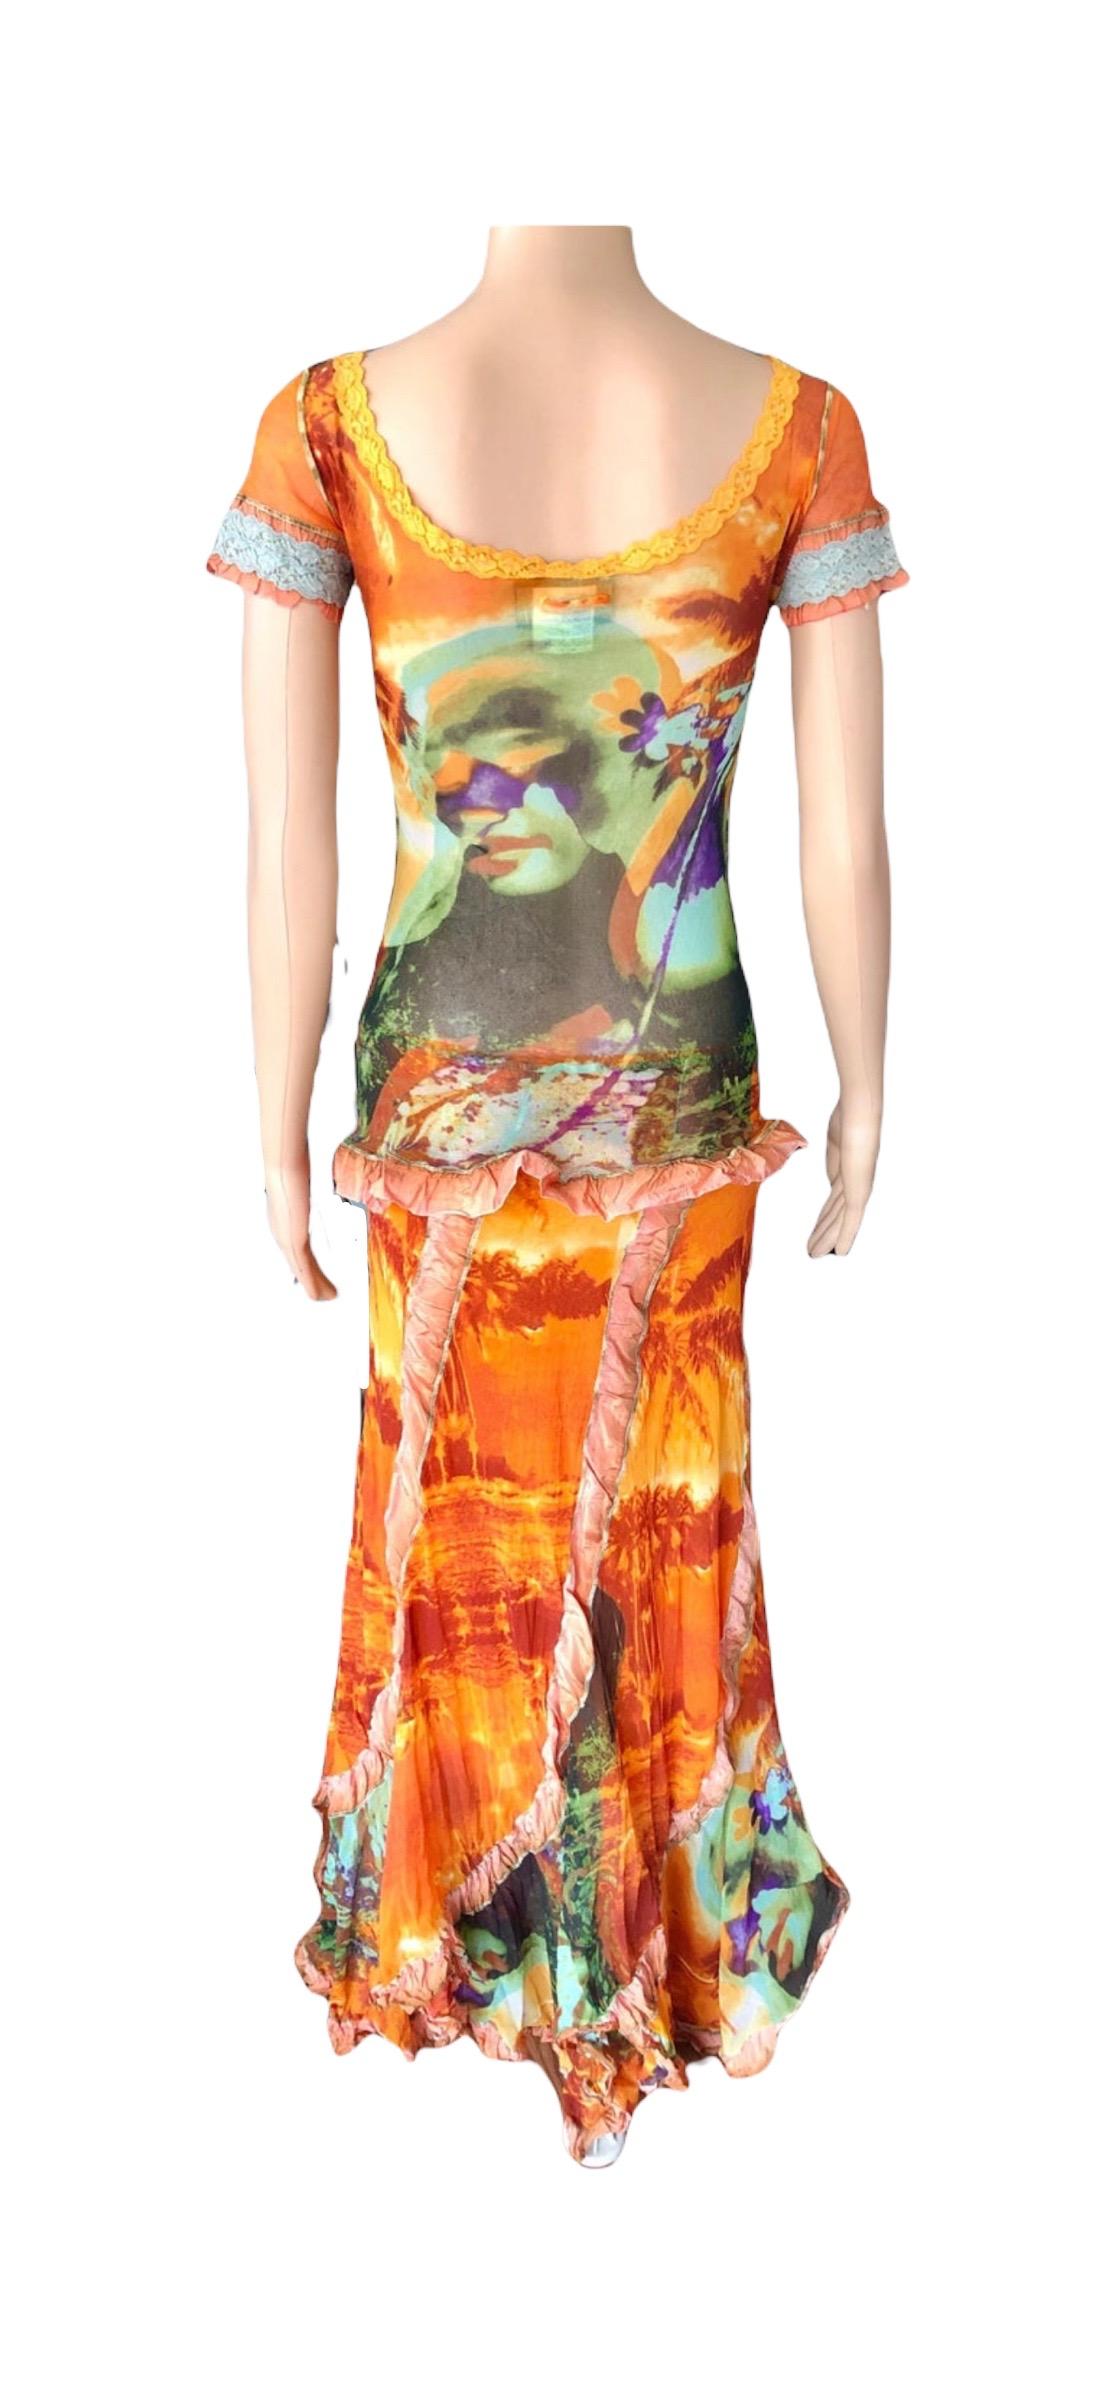 Jean Paul Gaultier S/S 2000 Abstract Psychedelic Top &Skirt Ensemble 2 Piece Set For Sale 11